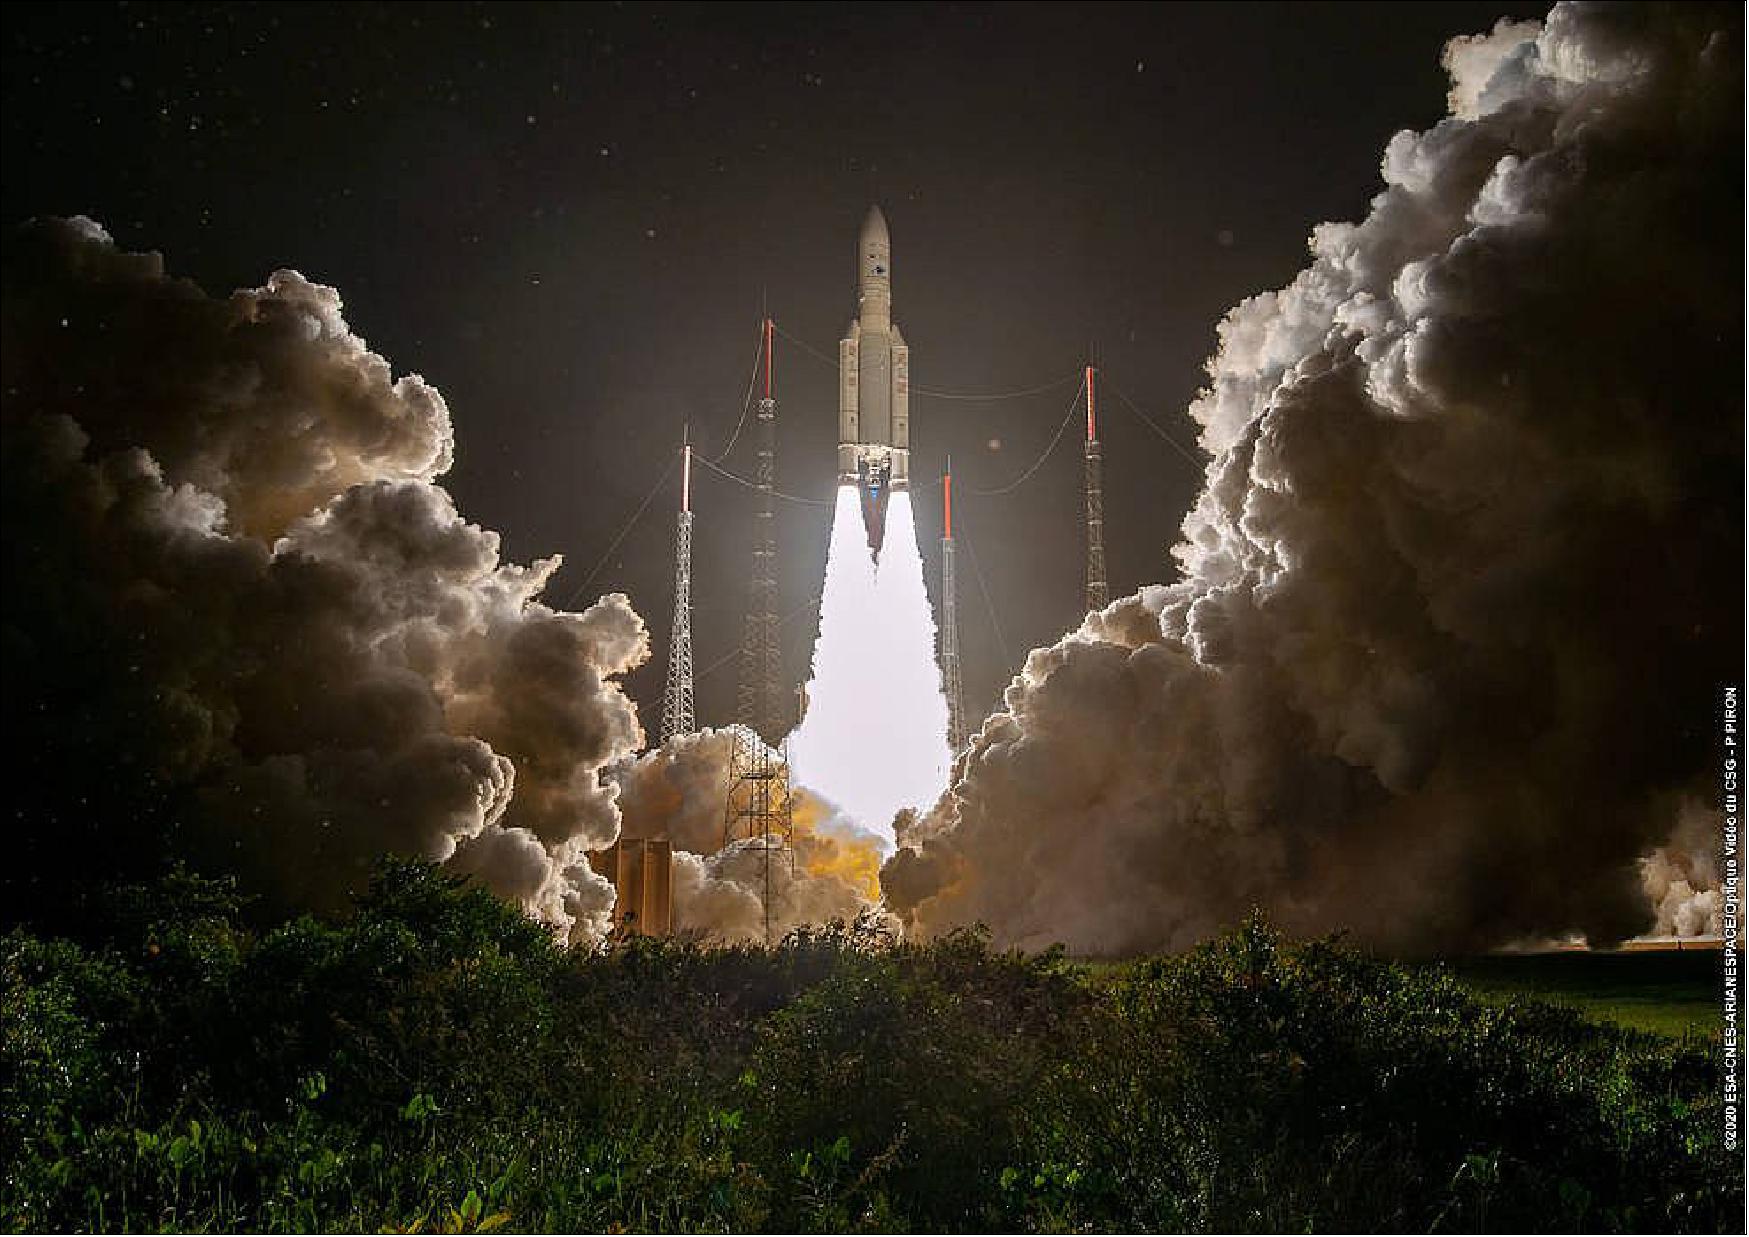 Figure 15: Launch of an Arianespace Ariane 5 ECA rocket carrying Korea's GEMS (Geostationary Environment Monitoring Spectrometer) on GK-2B from Kourou (image credit: Arianespace)